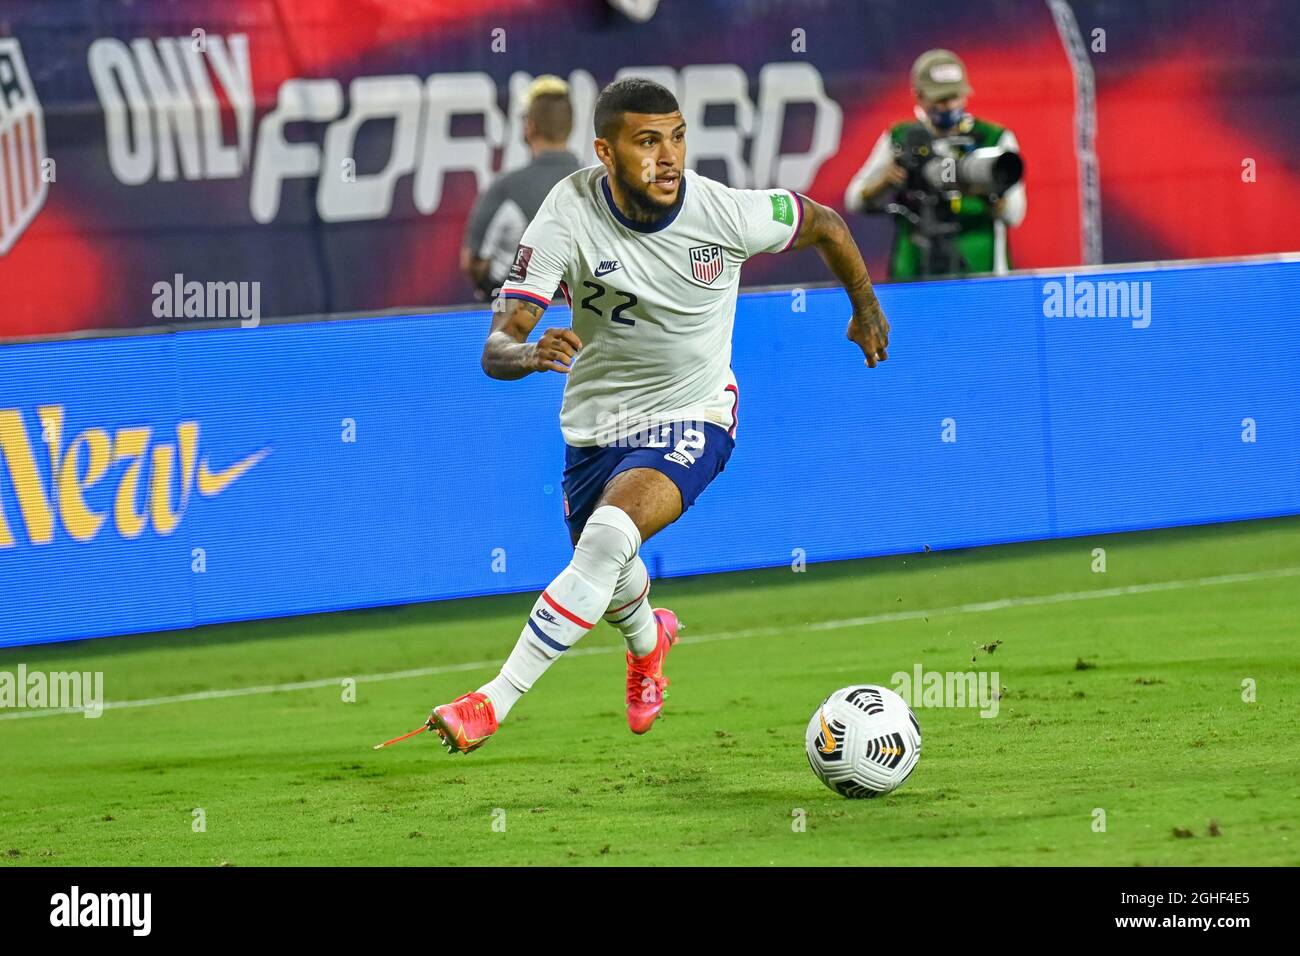 Nashville, TN, USA. 05th Sep, 2021. US defender DeAndre Yedlin (22), in action during the World Cup qualifying match between Canada and the USA, at Nissan Stadium in Nashville, TN. Kevin Langley/CSM/Alamy Live News Stock Photo